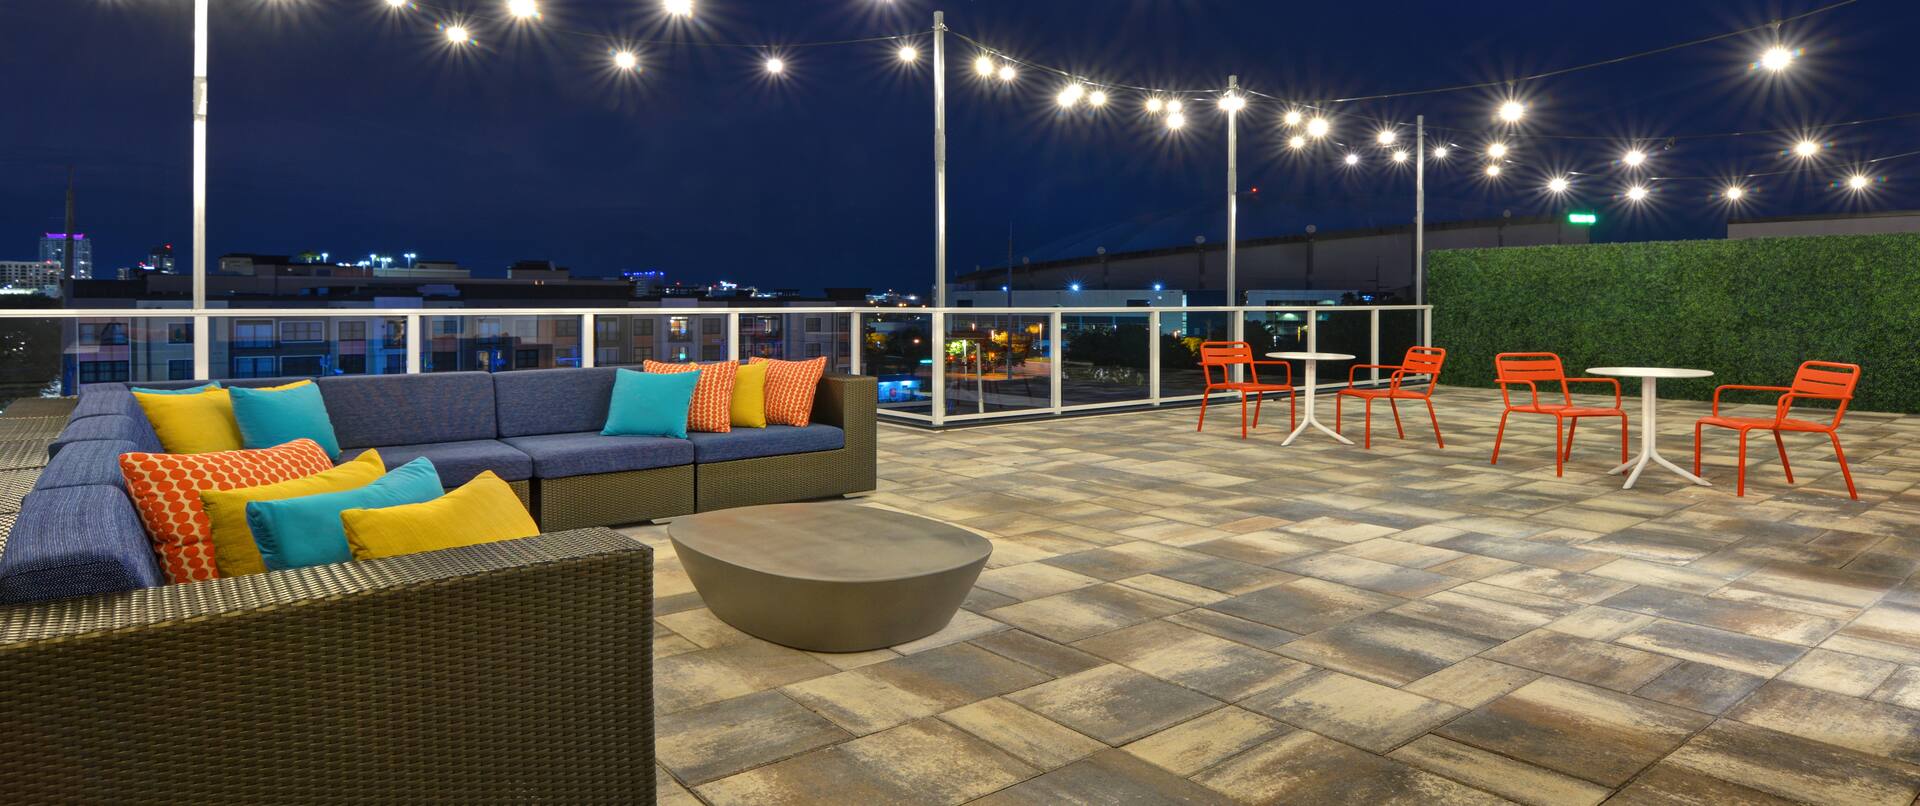 exterior patio with seating at dusk